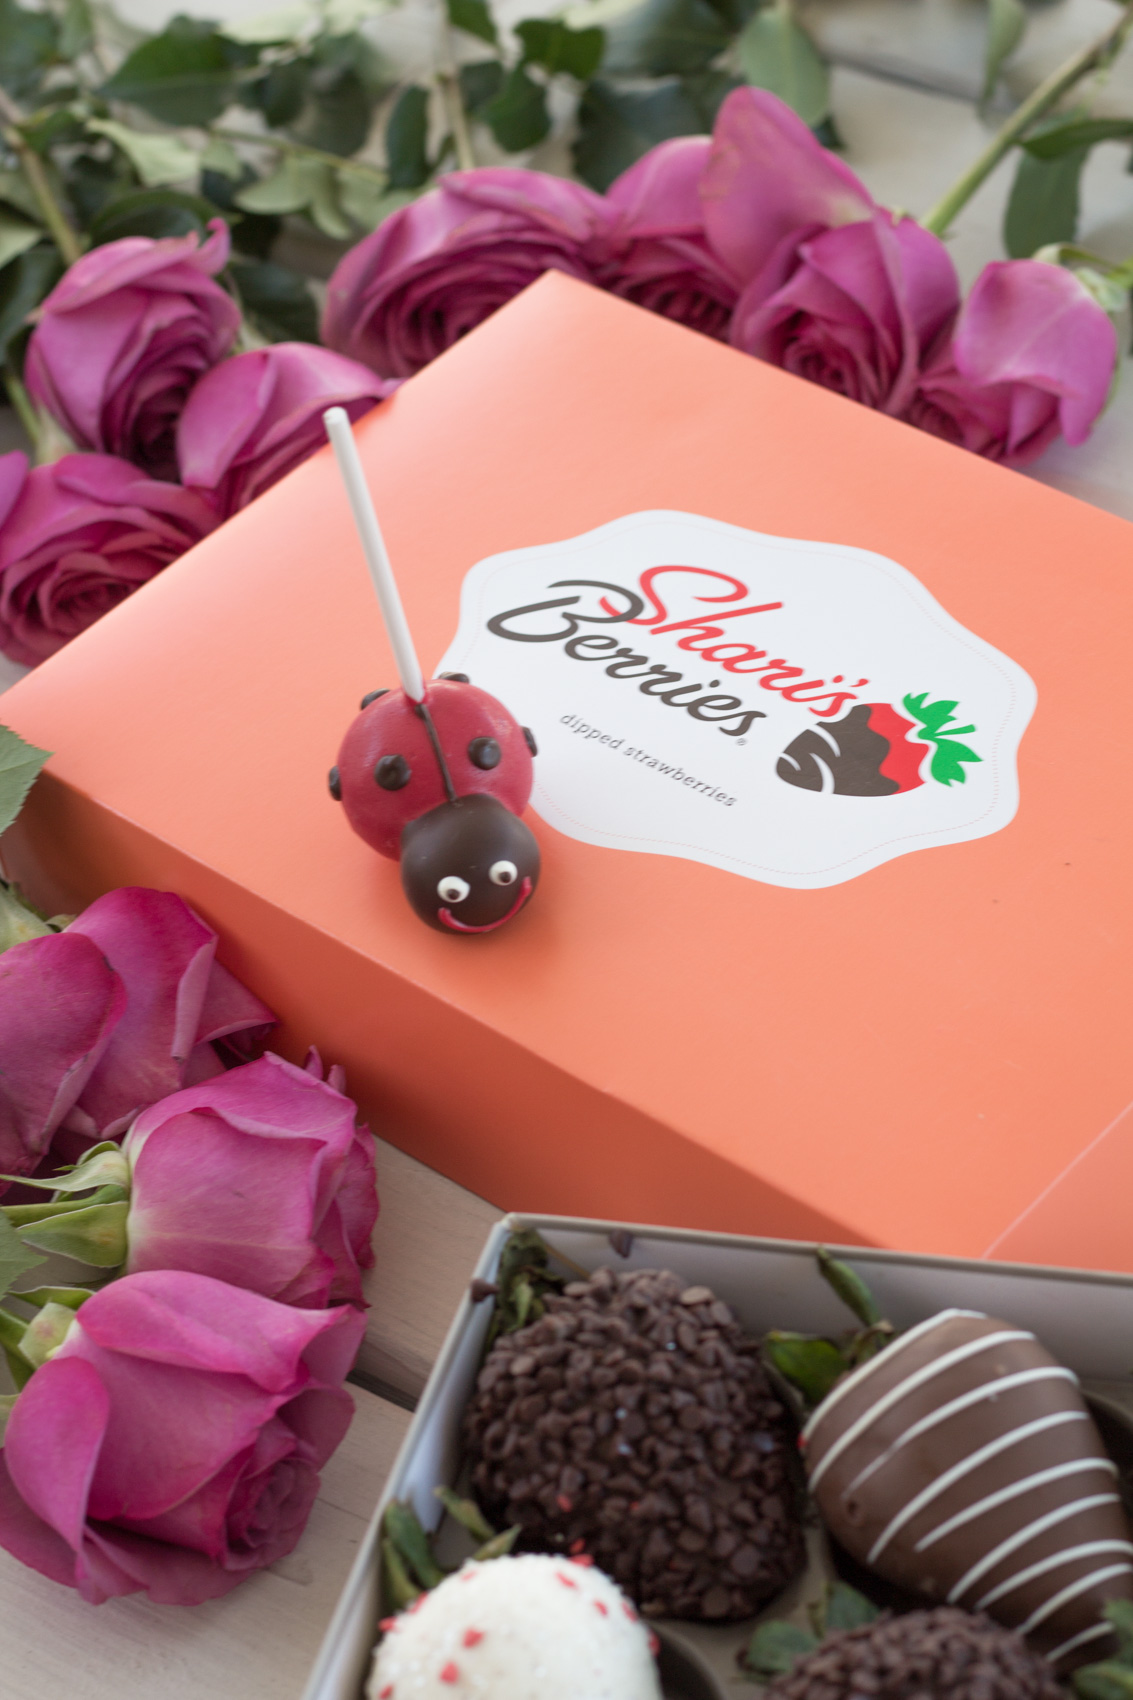 After hearing about them for years, I finally had the opportunity to try Shari's Berries thanks to an Instagram sponsorship. While it was not part of the agreement, I found it necessary to write my own Shari's Berries review due to the incredible quality, detail, and deliciousness that goes into every product!